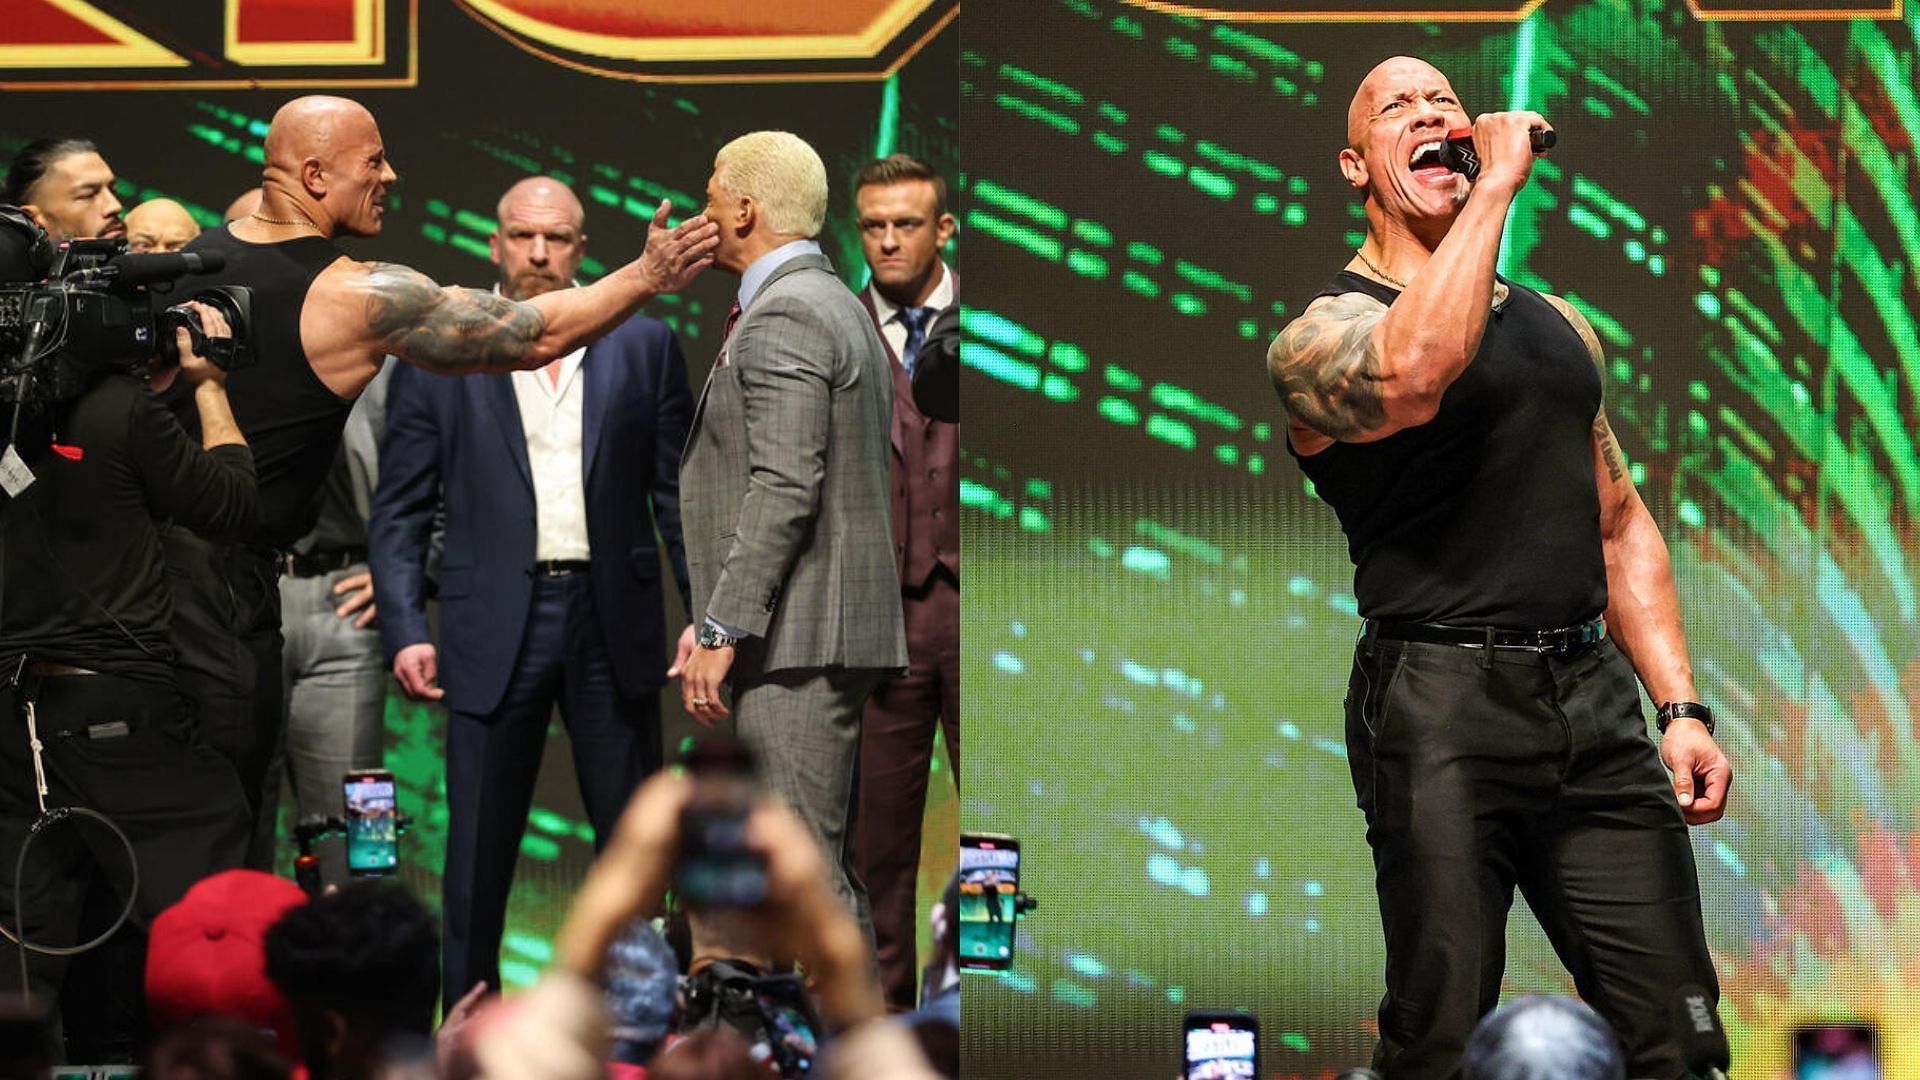 The Rock and Cody Rhodes had a heated moment at the WrestleMania XL press event